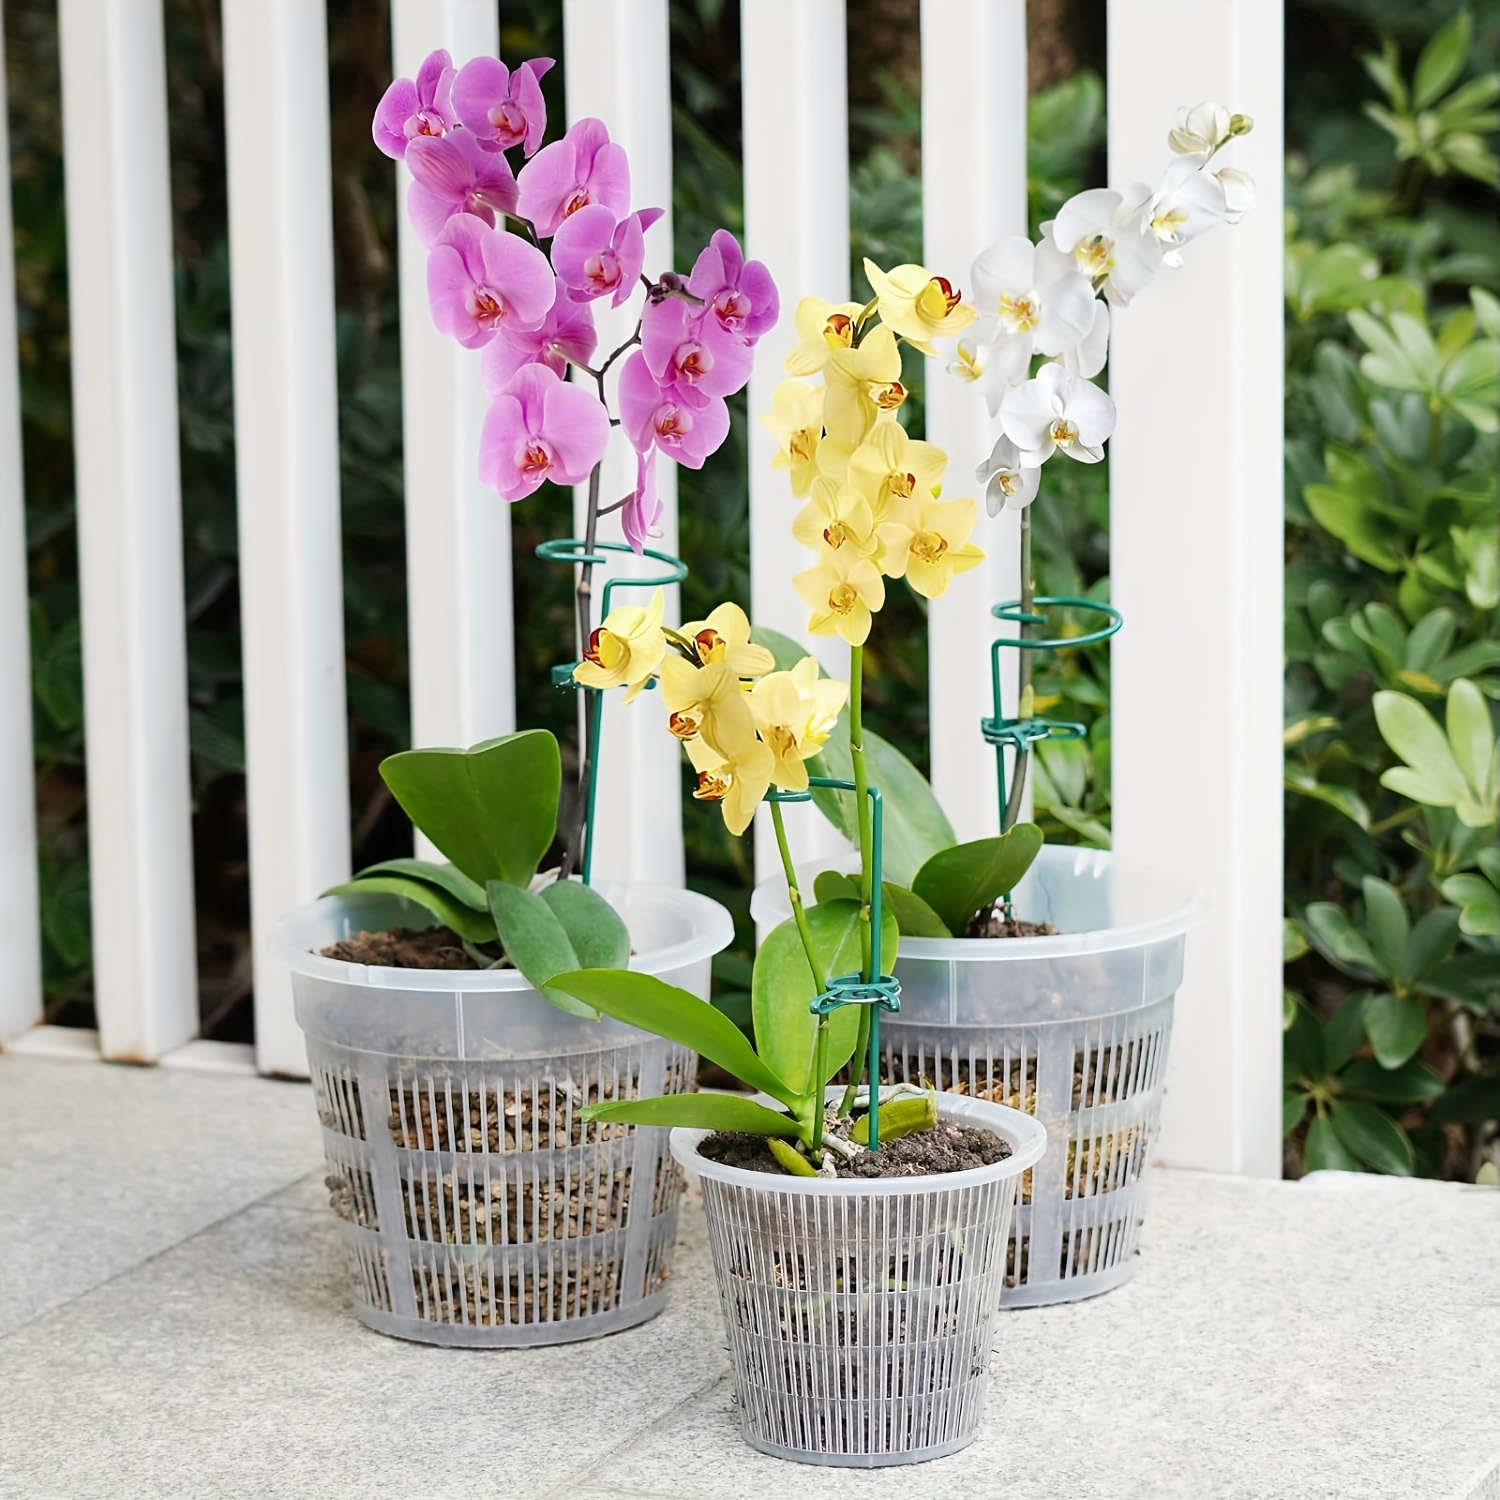 

5-piece Transparent Orchid Pots With Drainage Holes - Breathable, Durable Plastic Flower Pots For Indoor & Outdoor Use